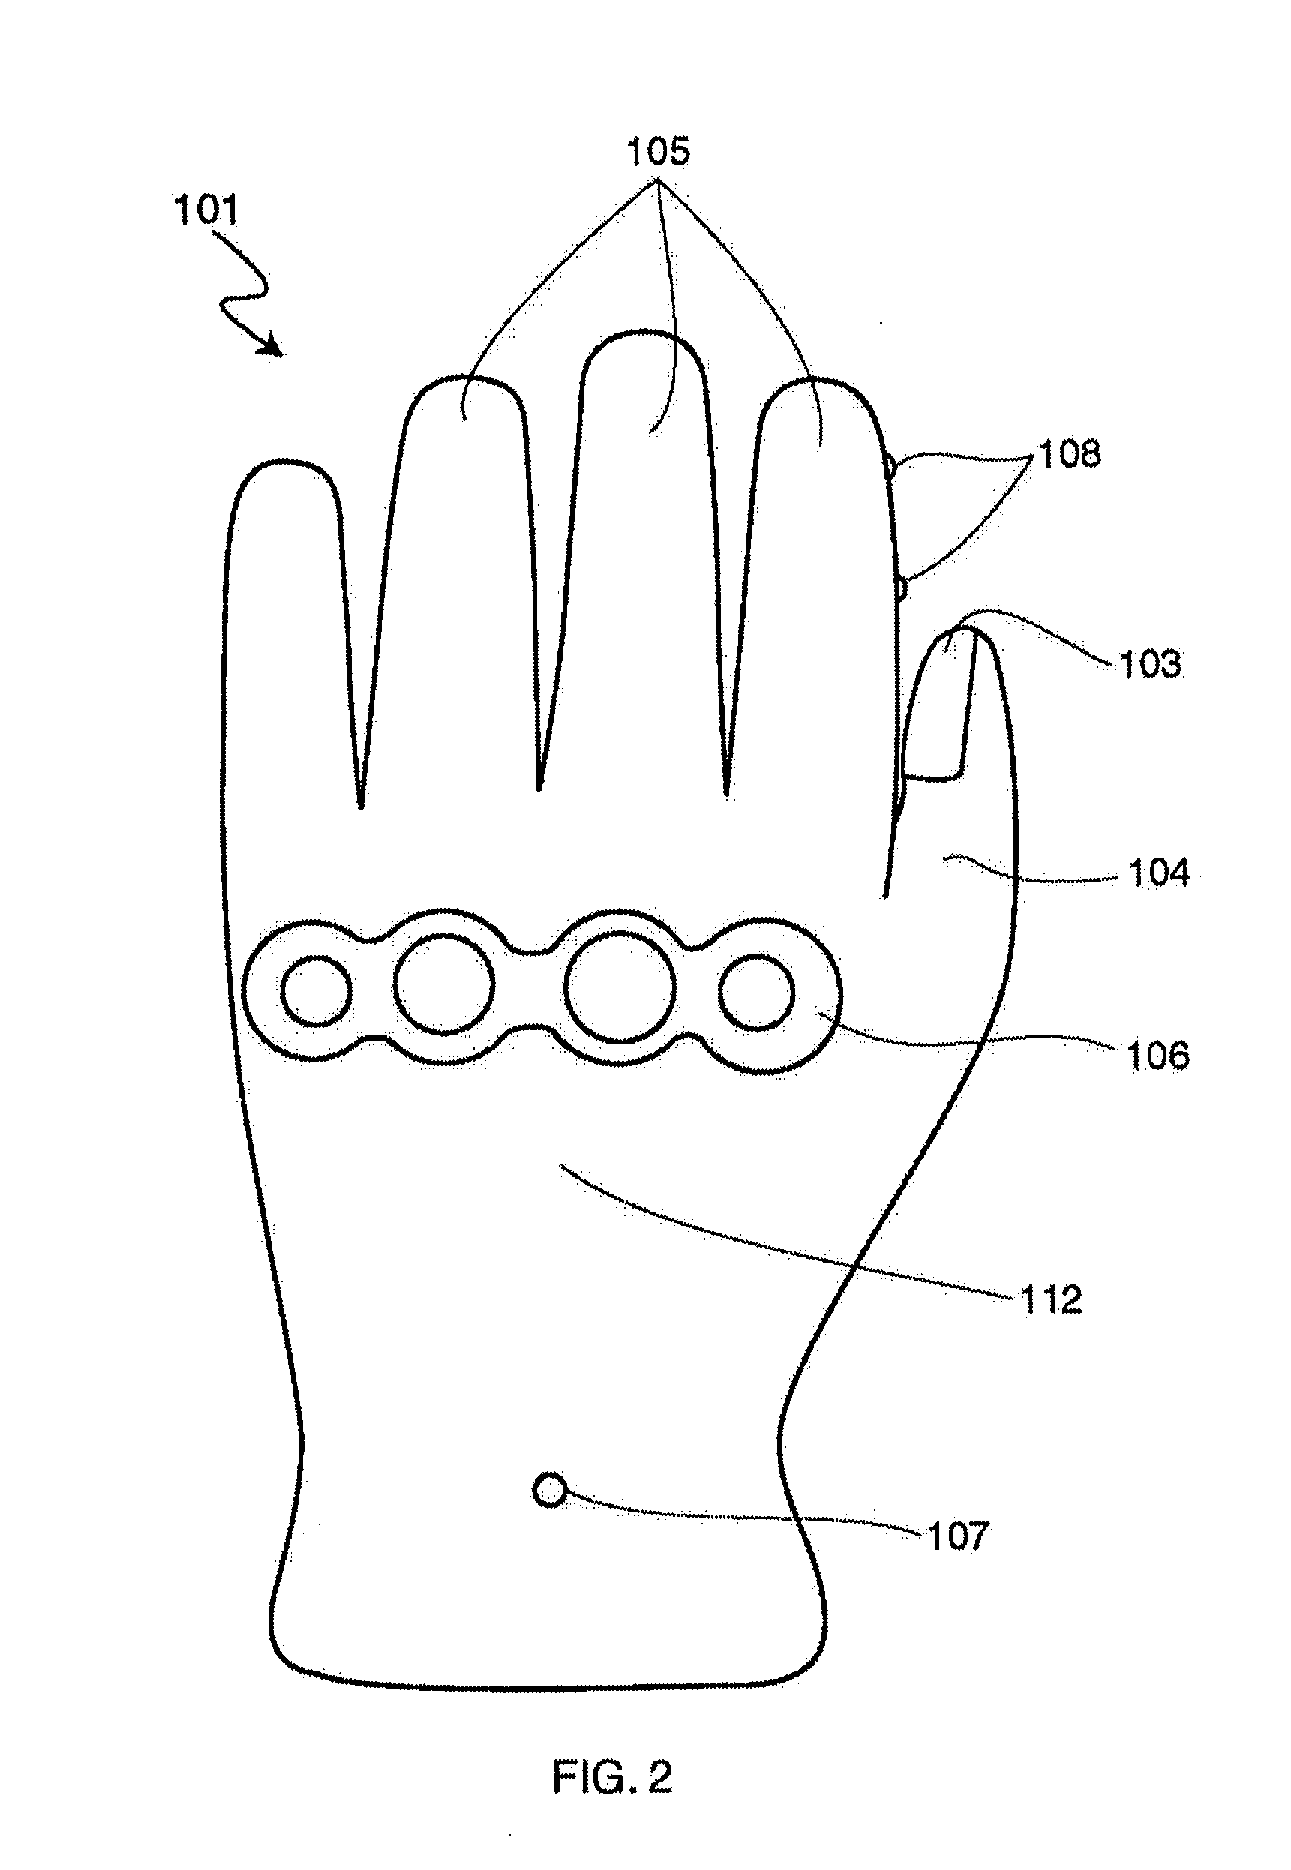 Electronic Control Glove